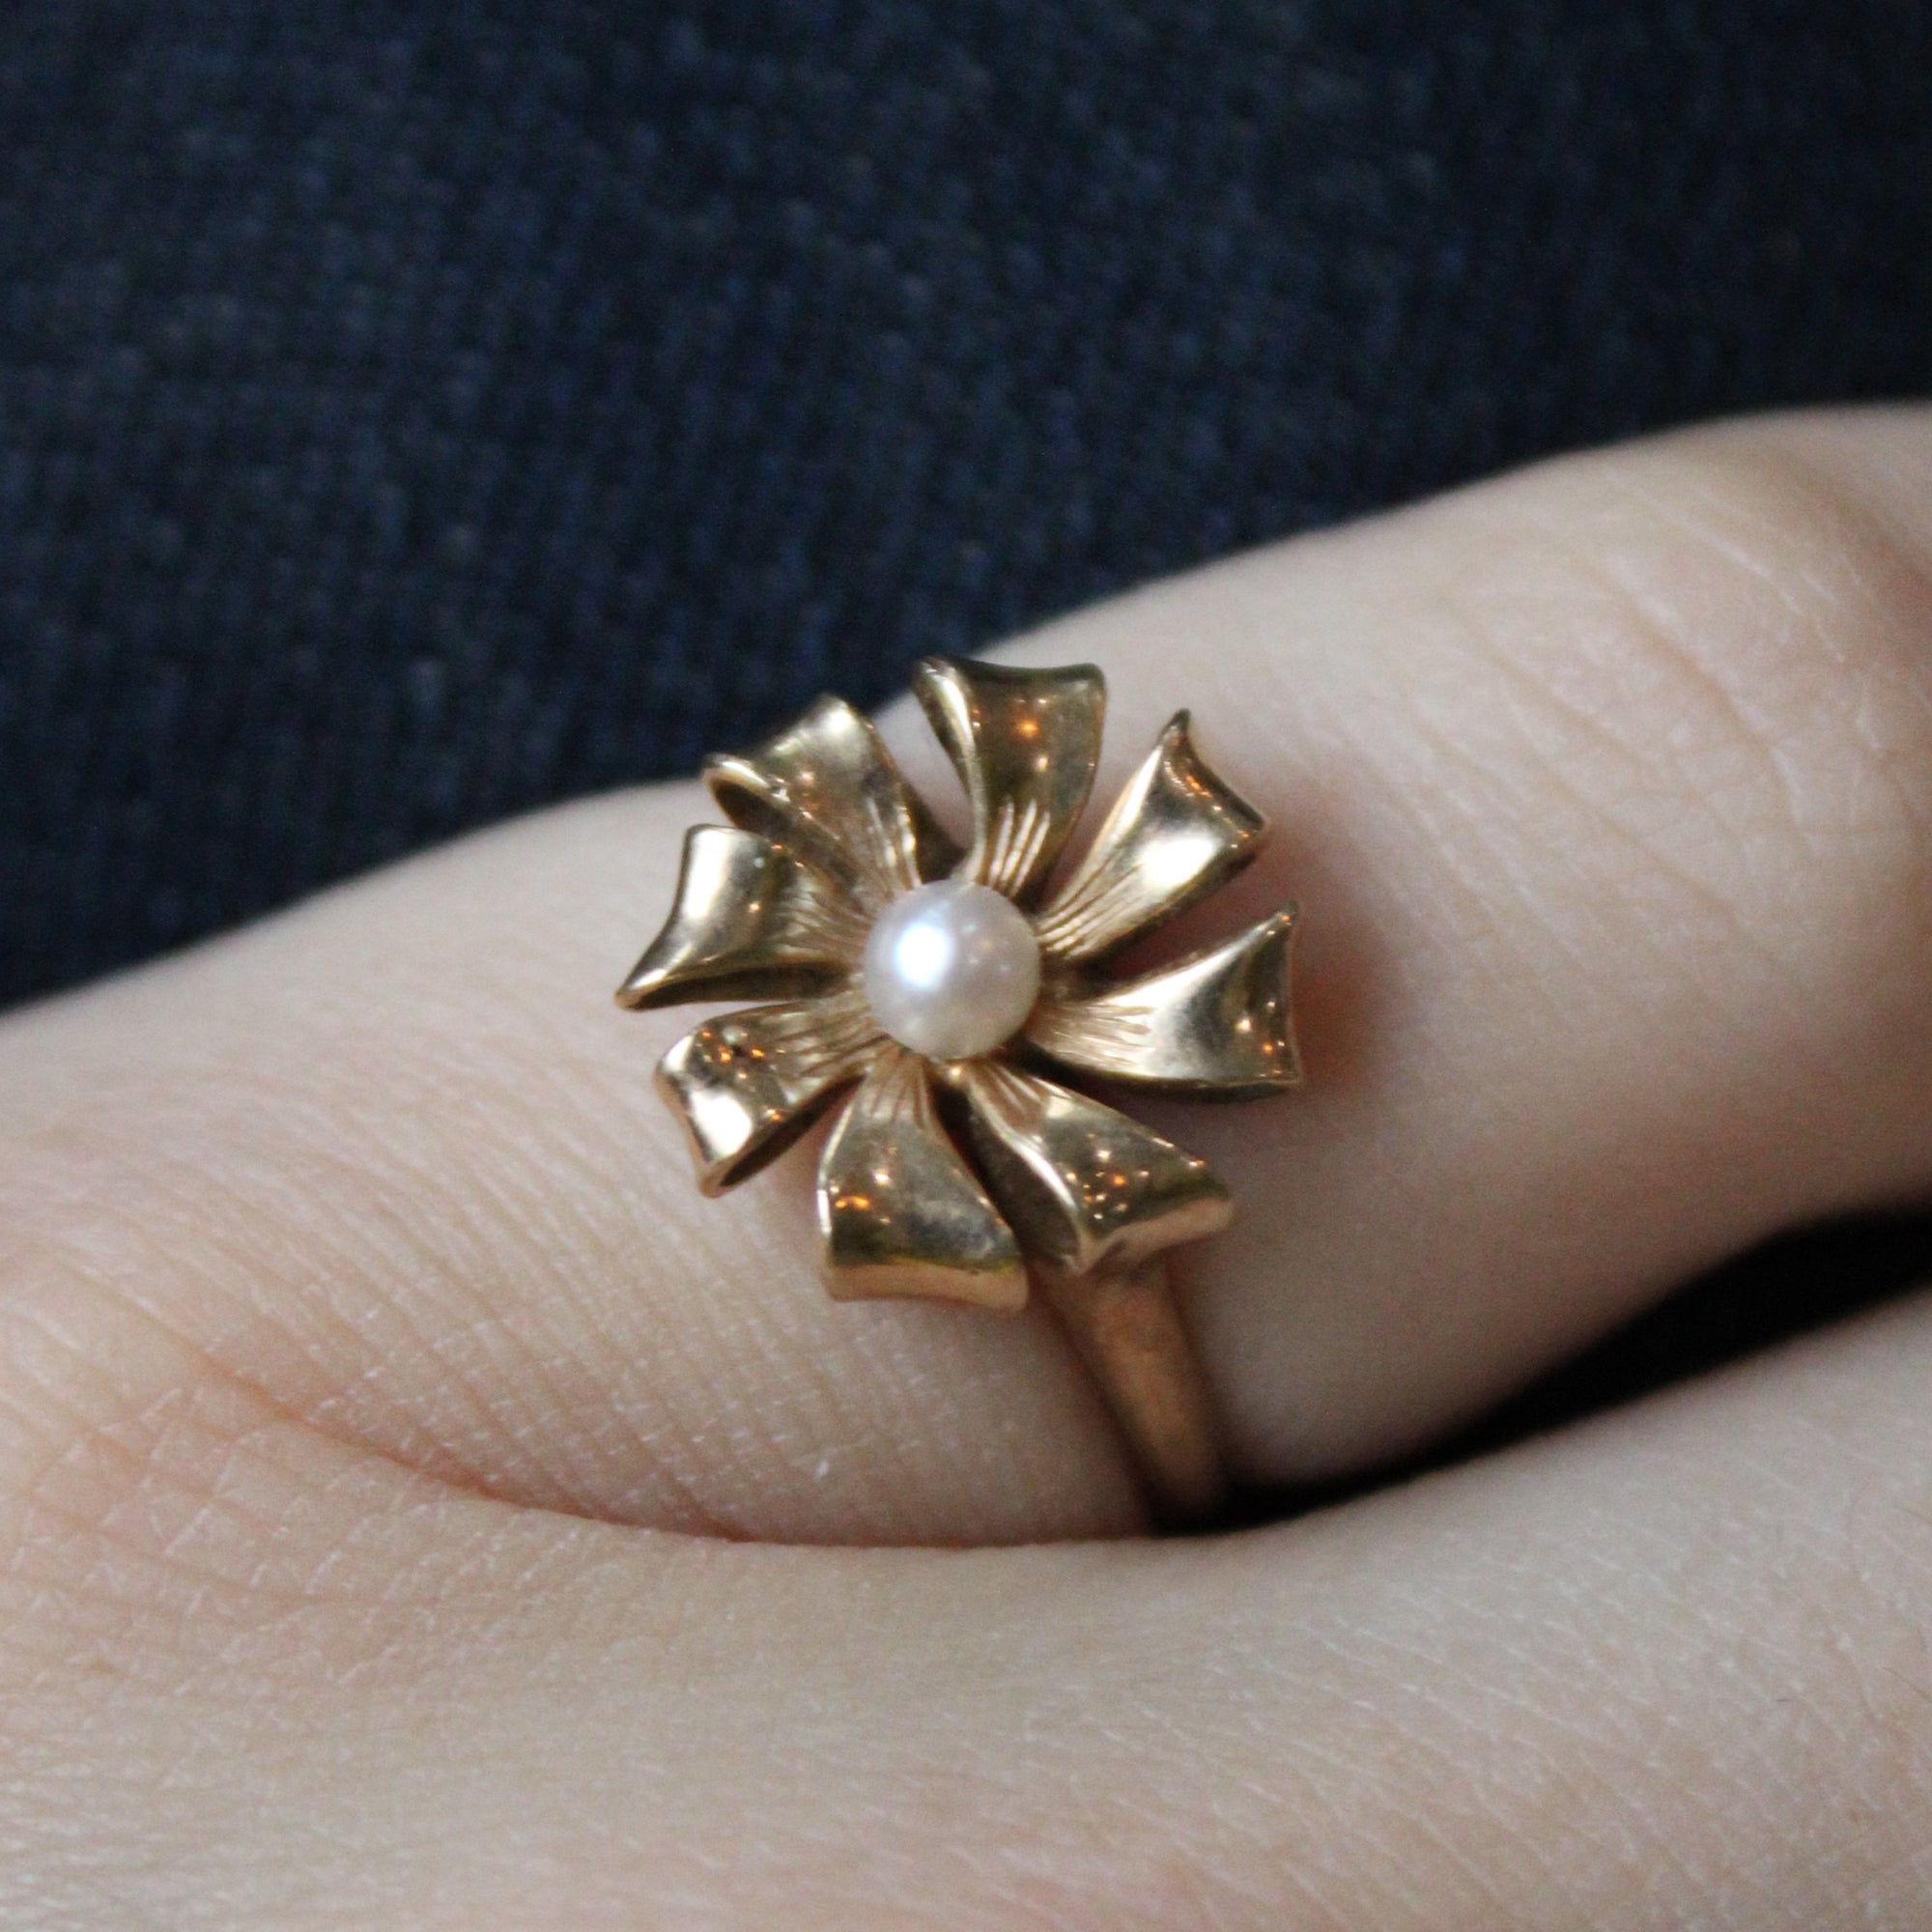 Pearl Bow Design Ring | SZ 6 |